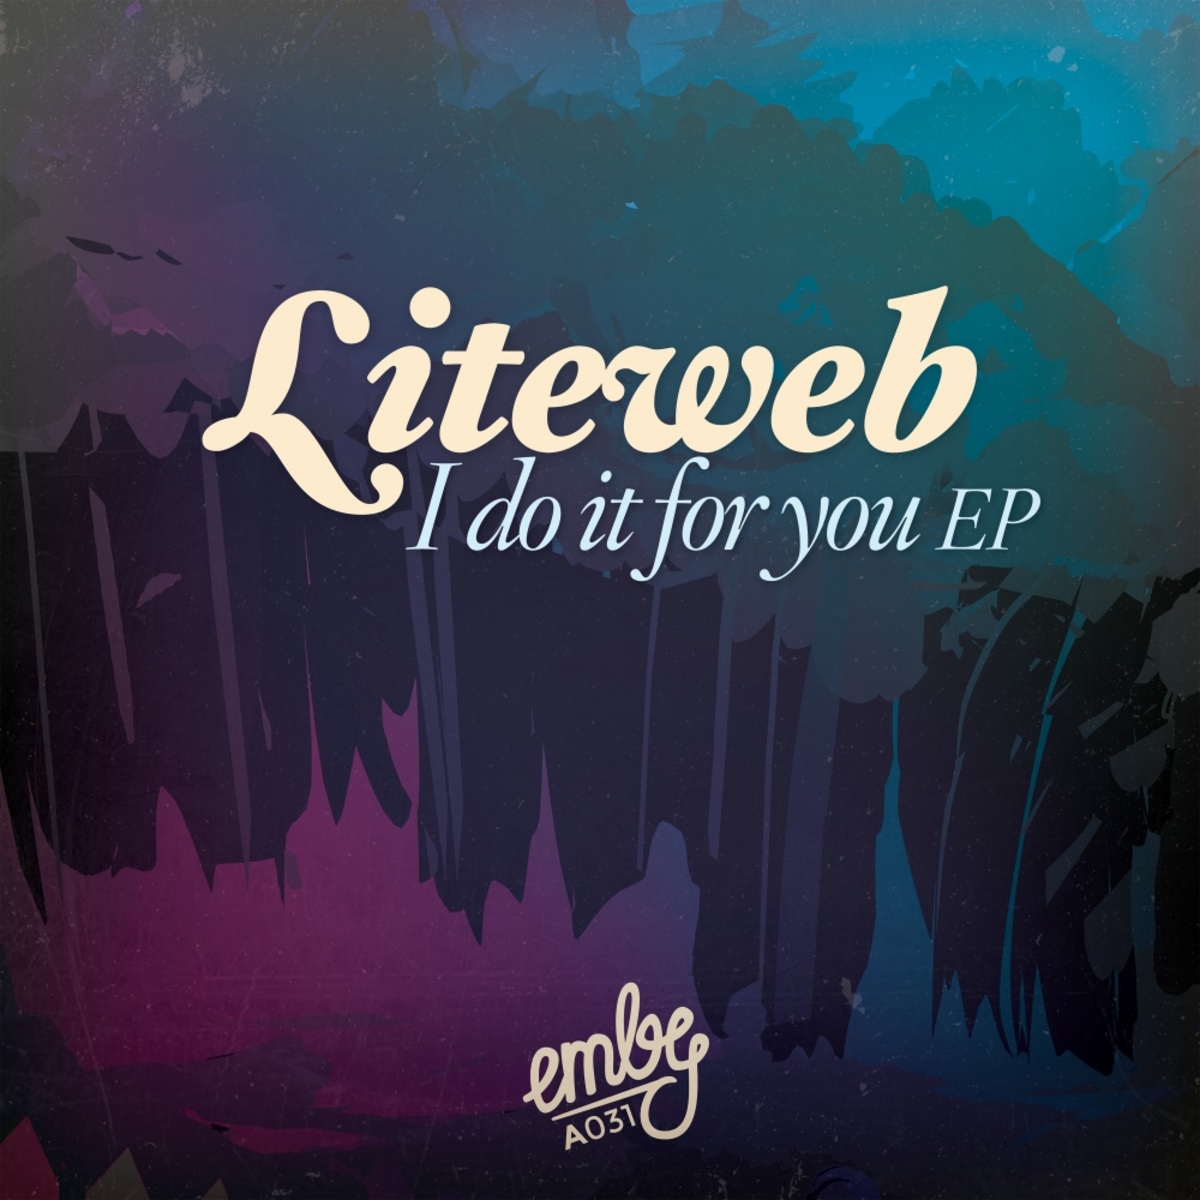 Liteweb - I Do It For You EP / Emby